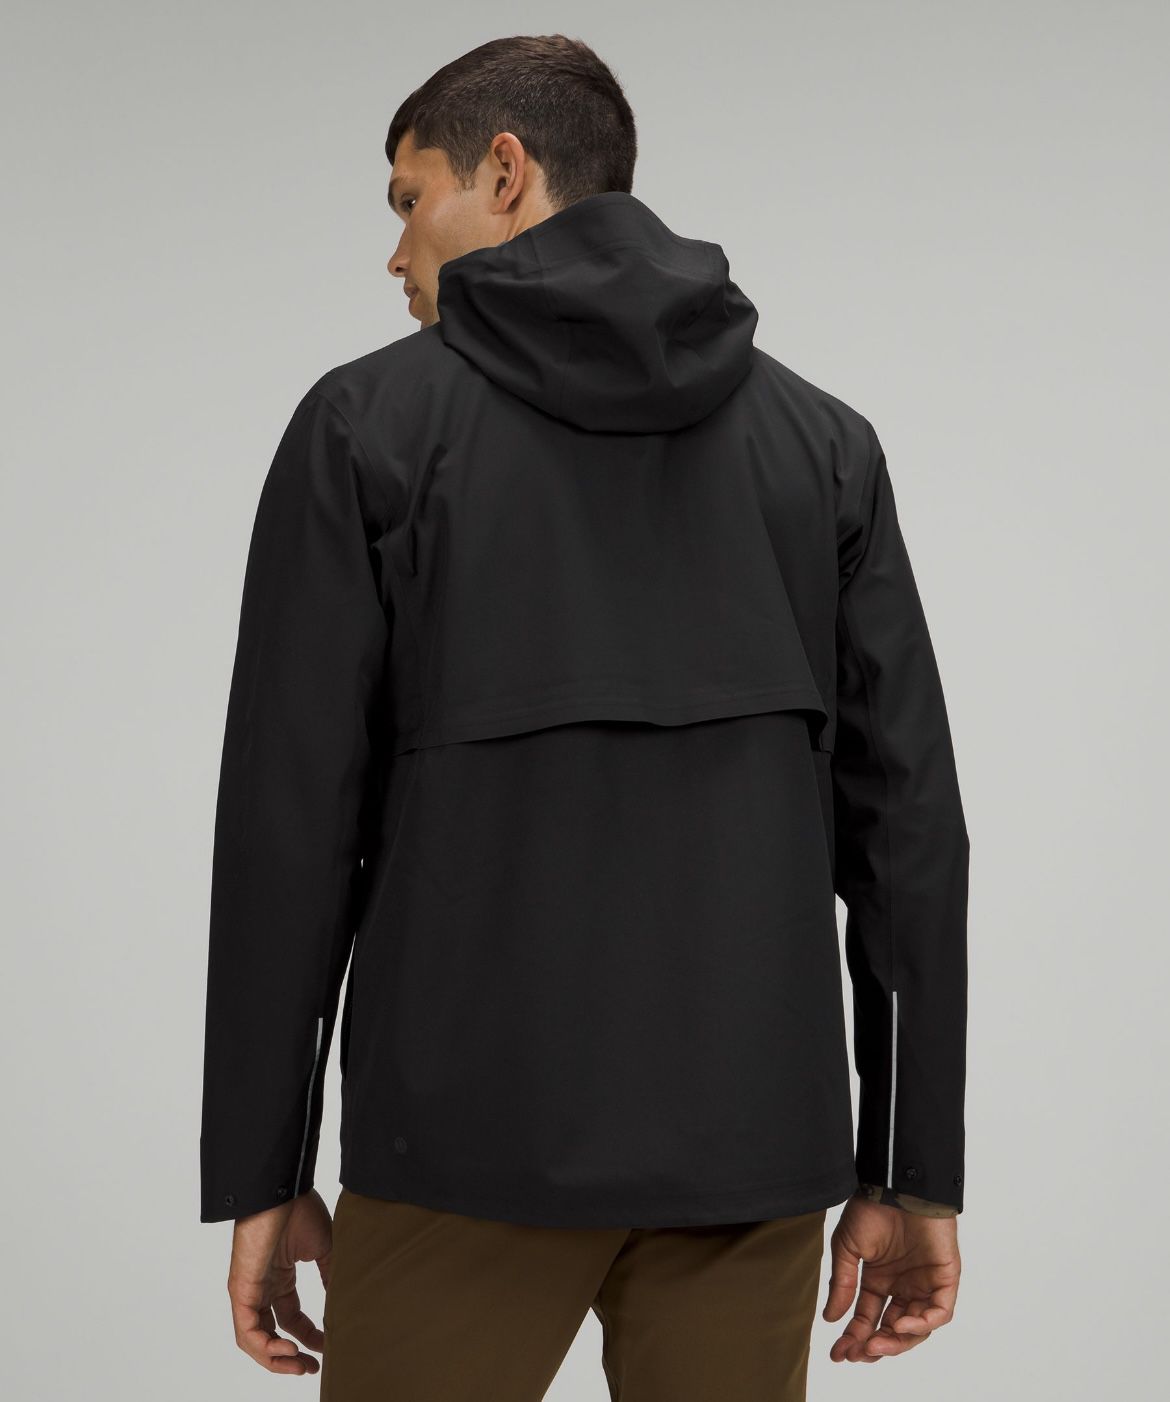 NWT Lululemon Men’s Outpour StretchSeal Jacket in Black